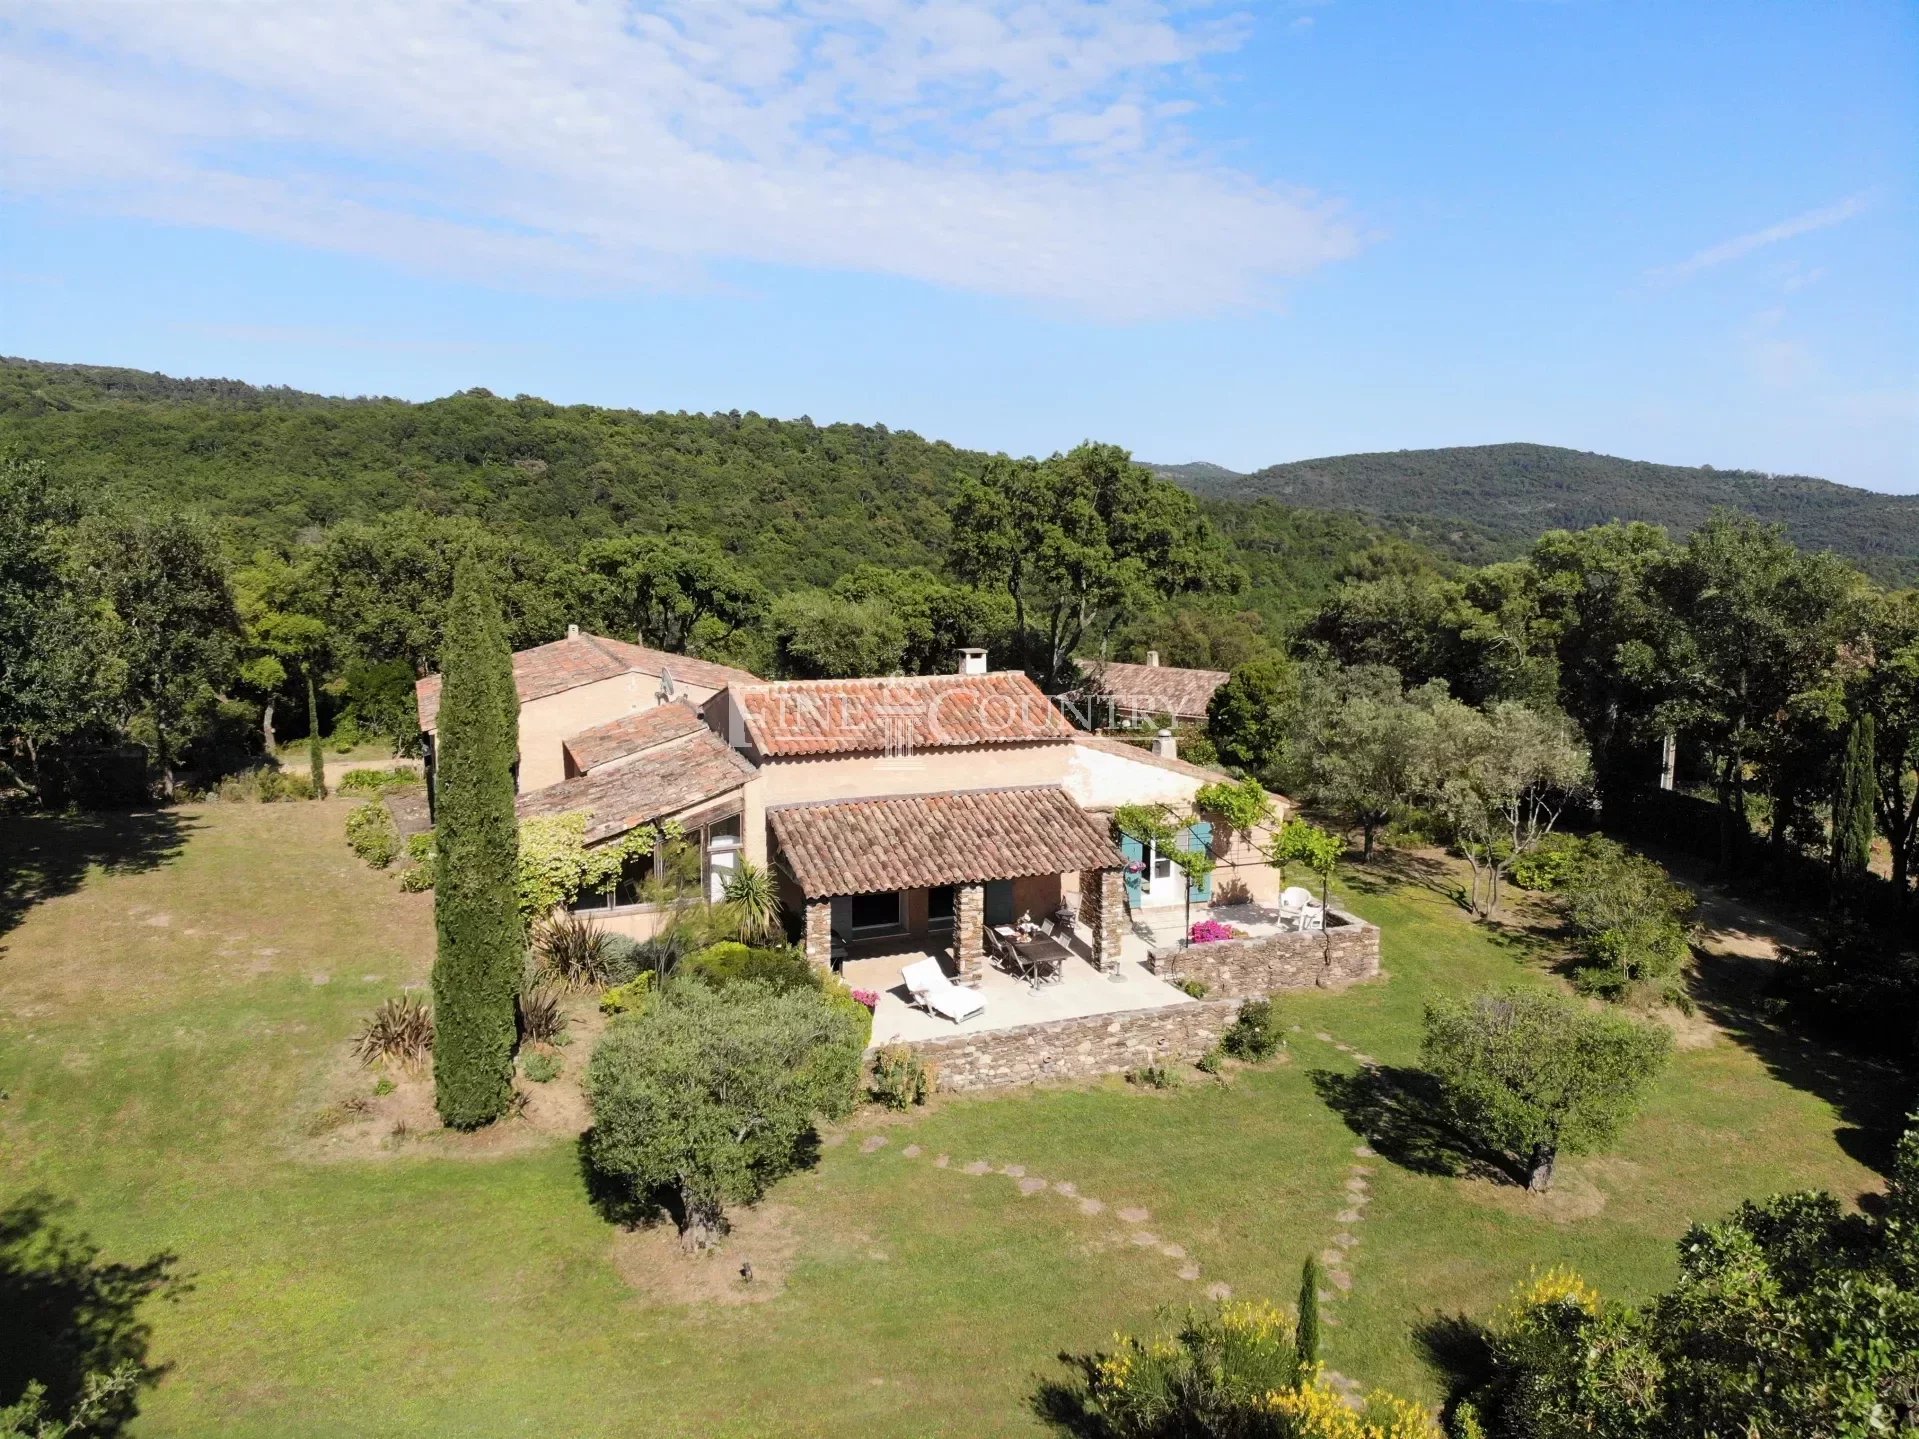 Property for sale with private vineyard in La Garde Freinet